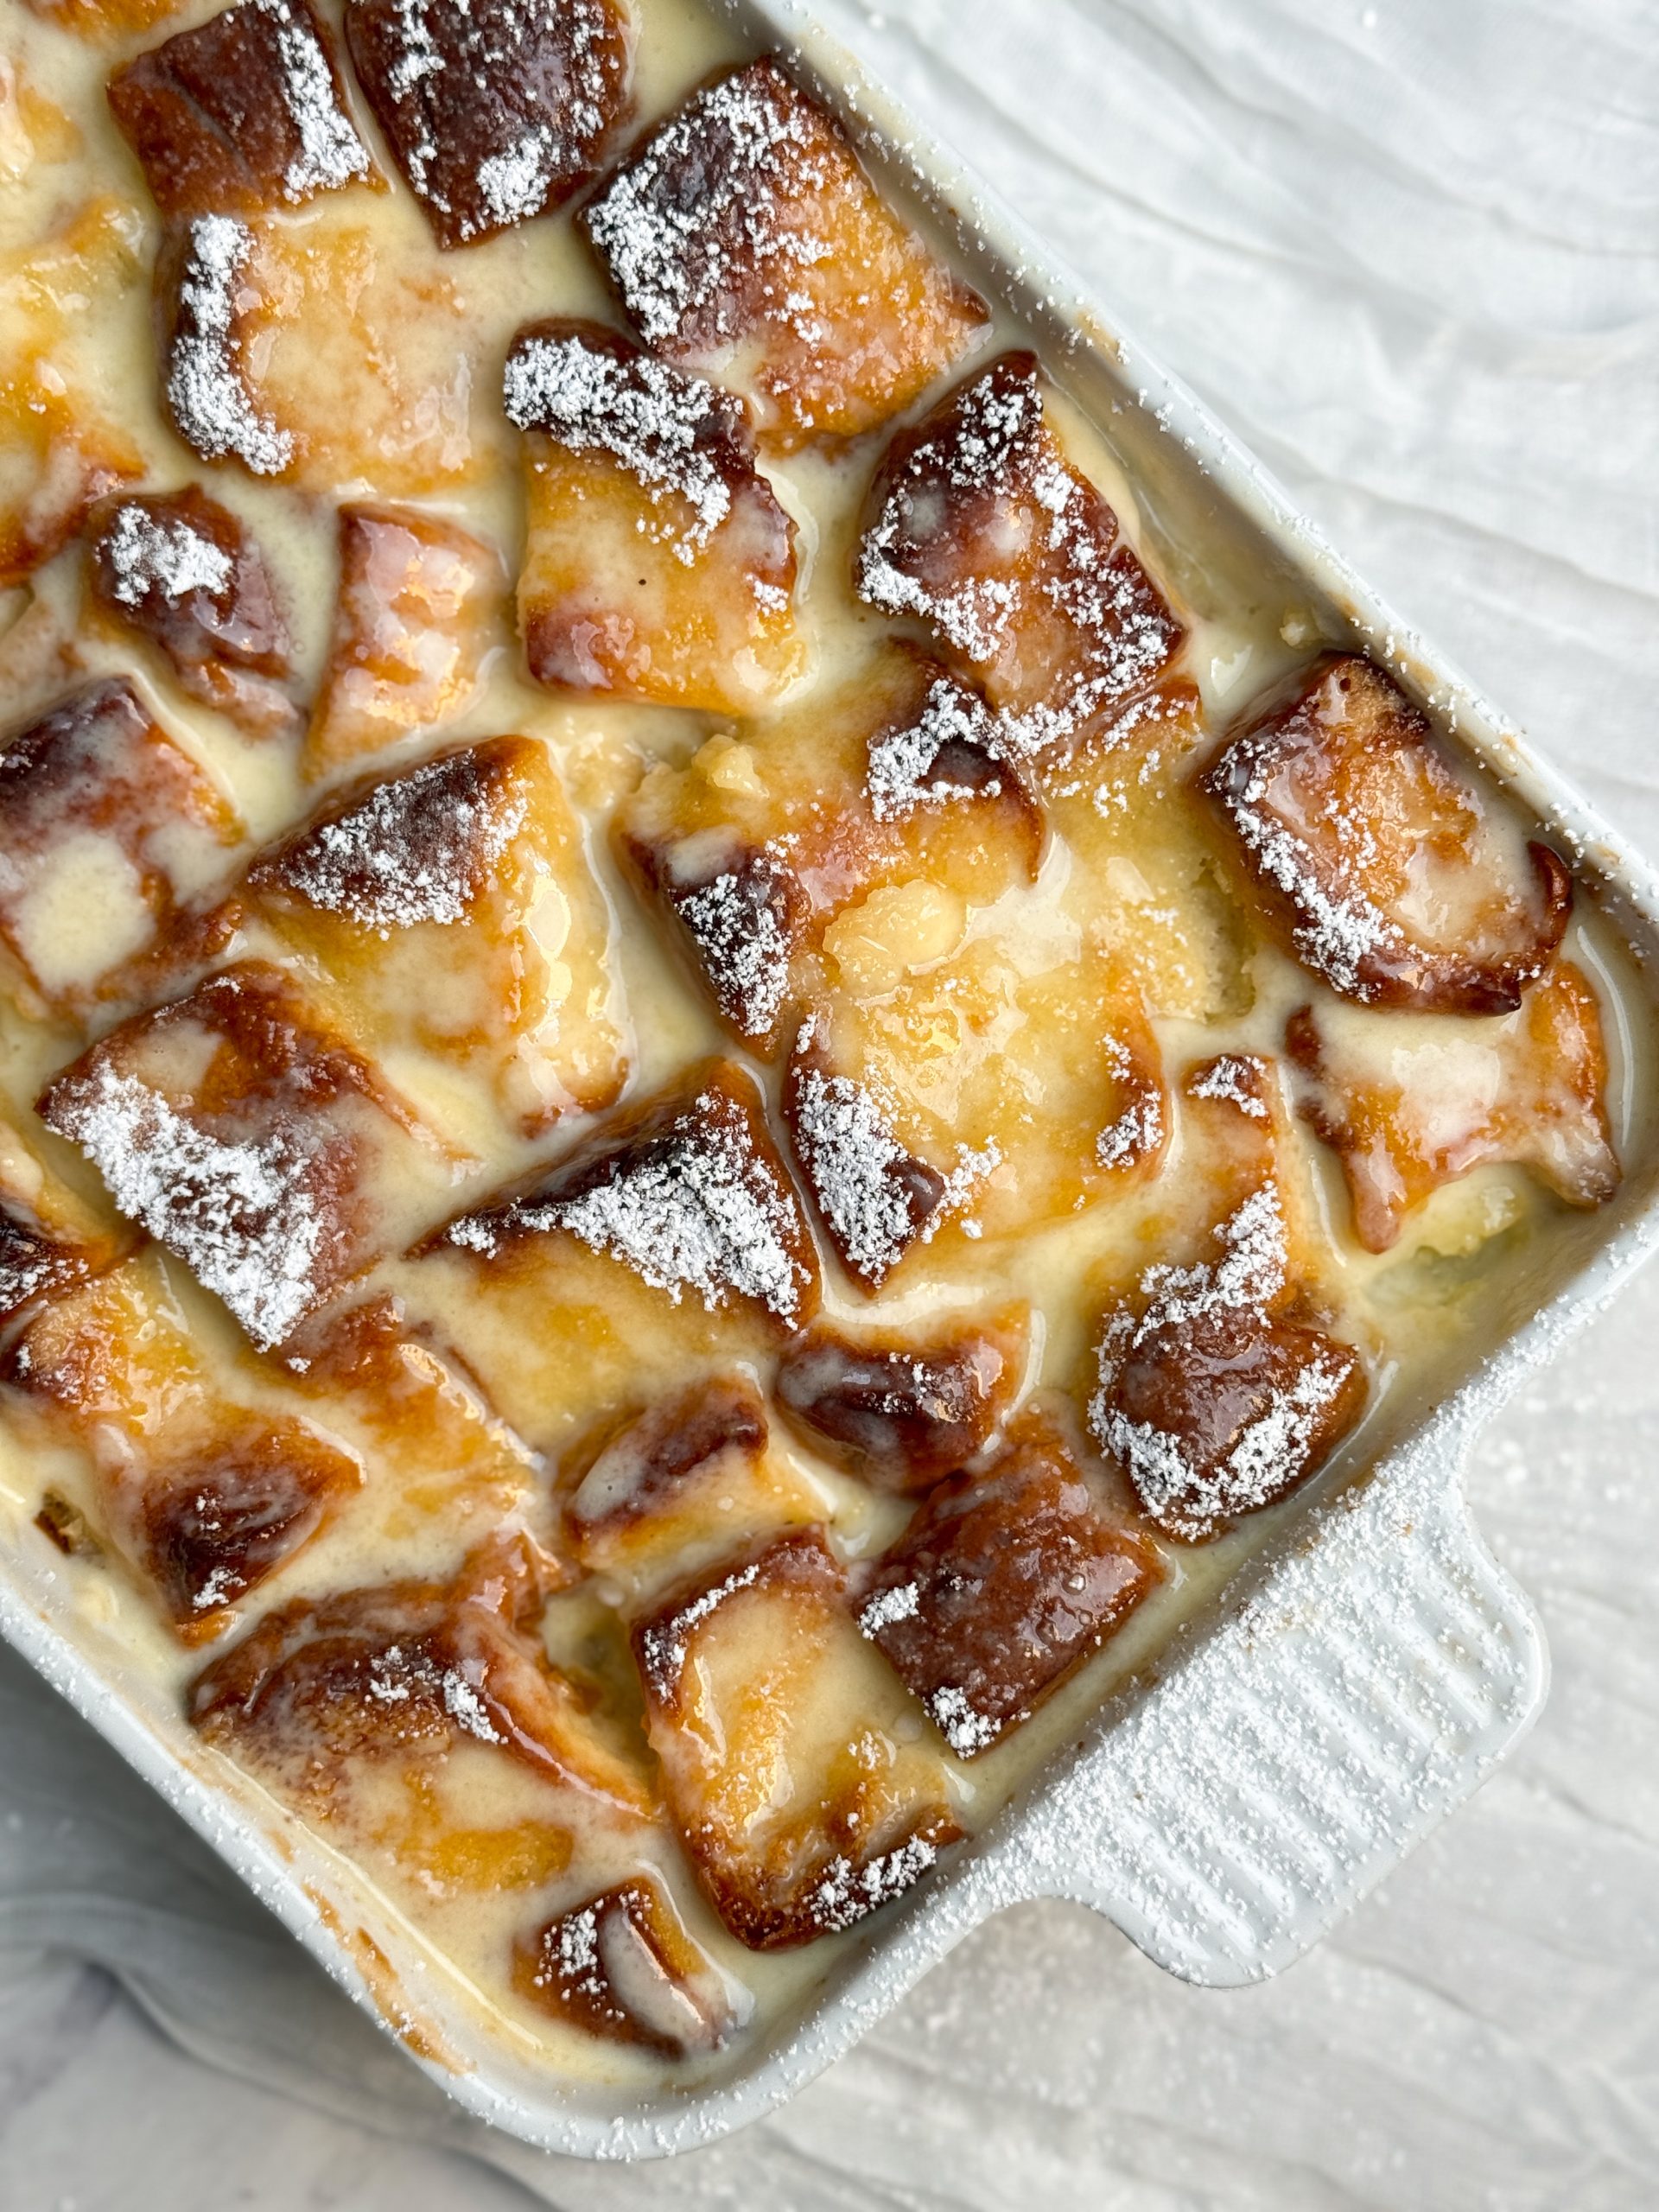 vanilla bread pudding in a white ceramic dish. bread pudding has a lovely golden color and has been soaked in a creme anglaise and dusted with powdered sugar. close up image